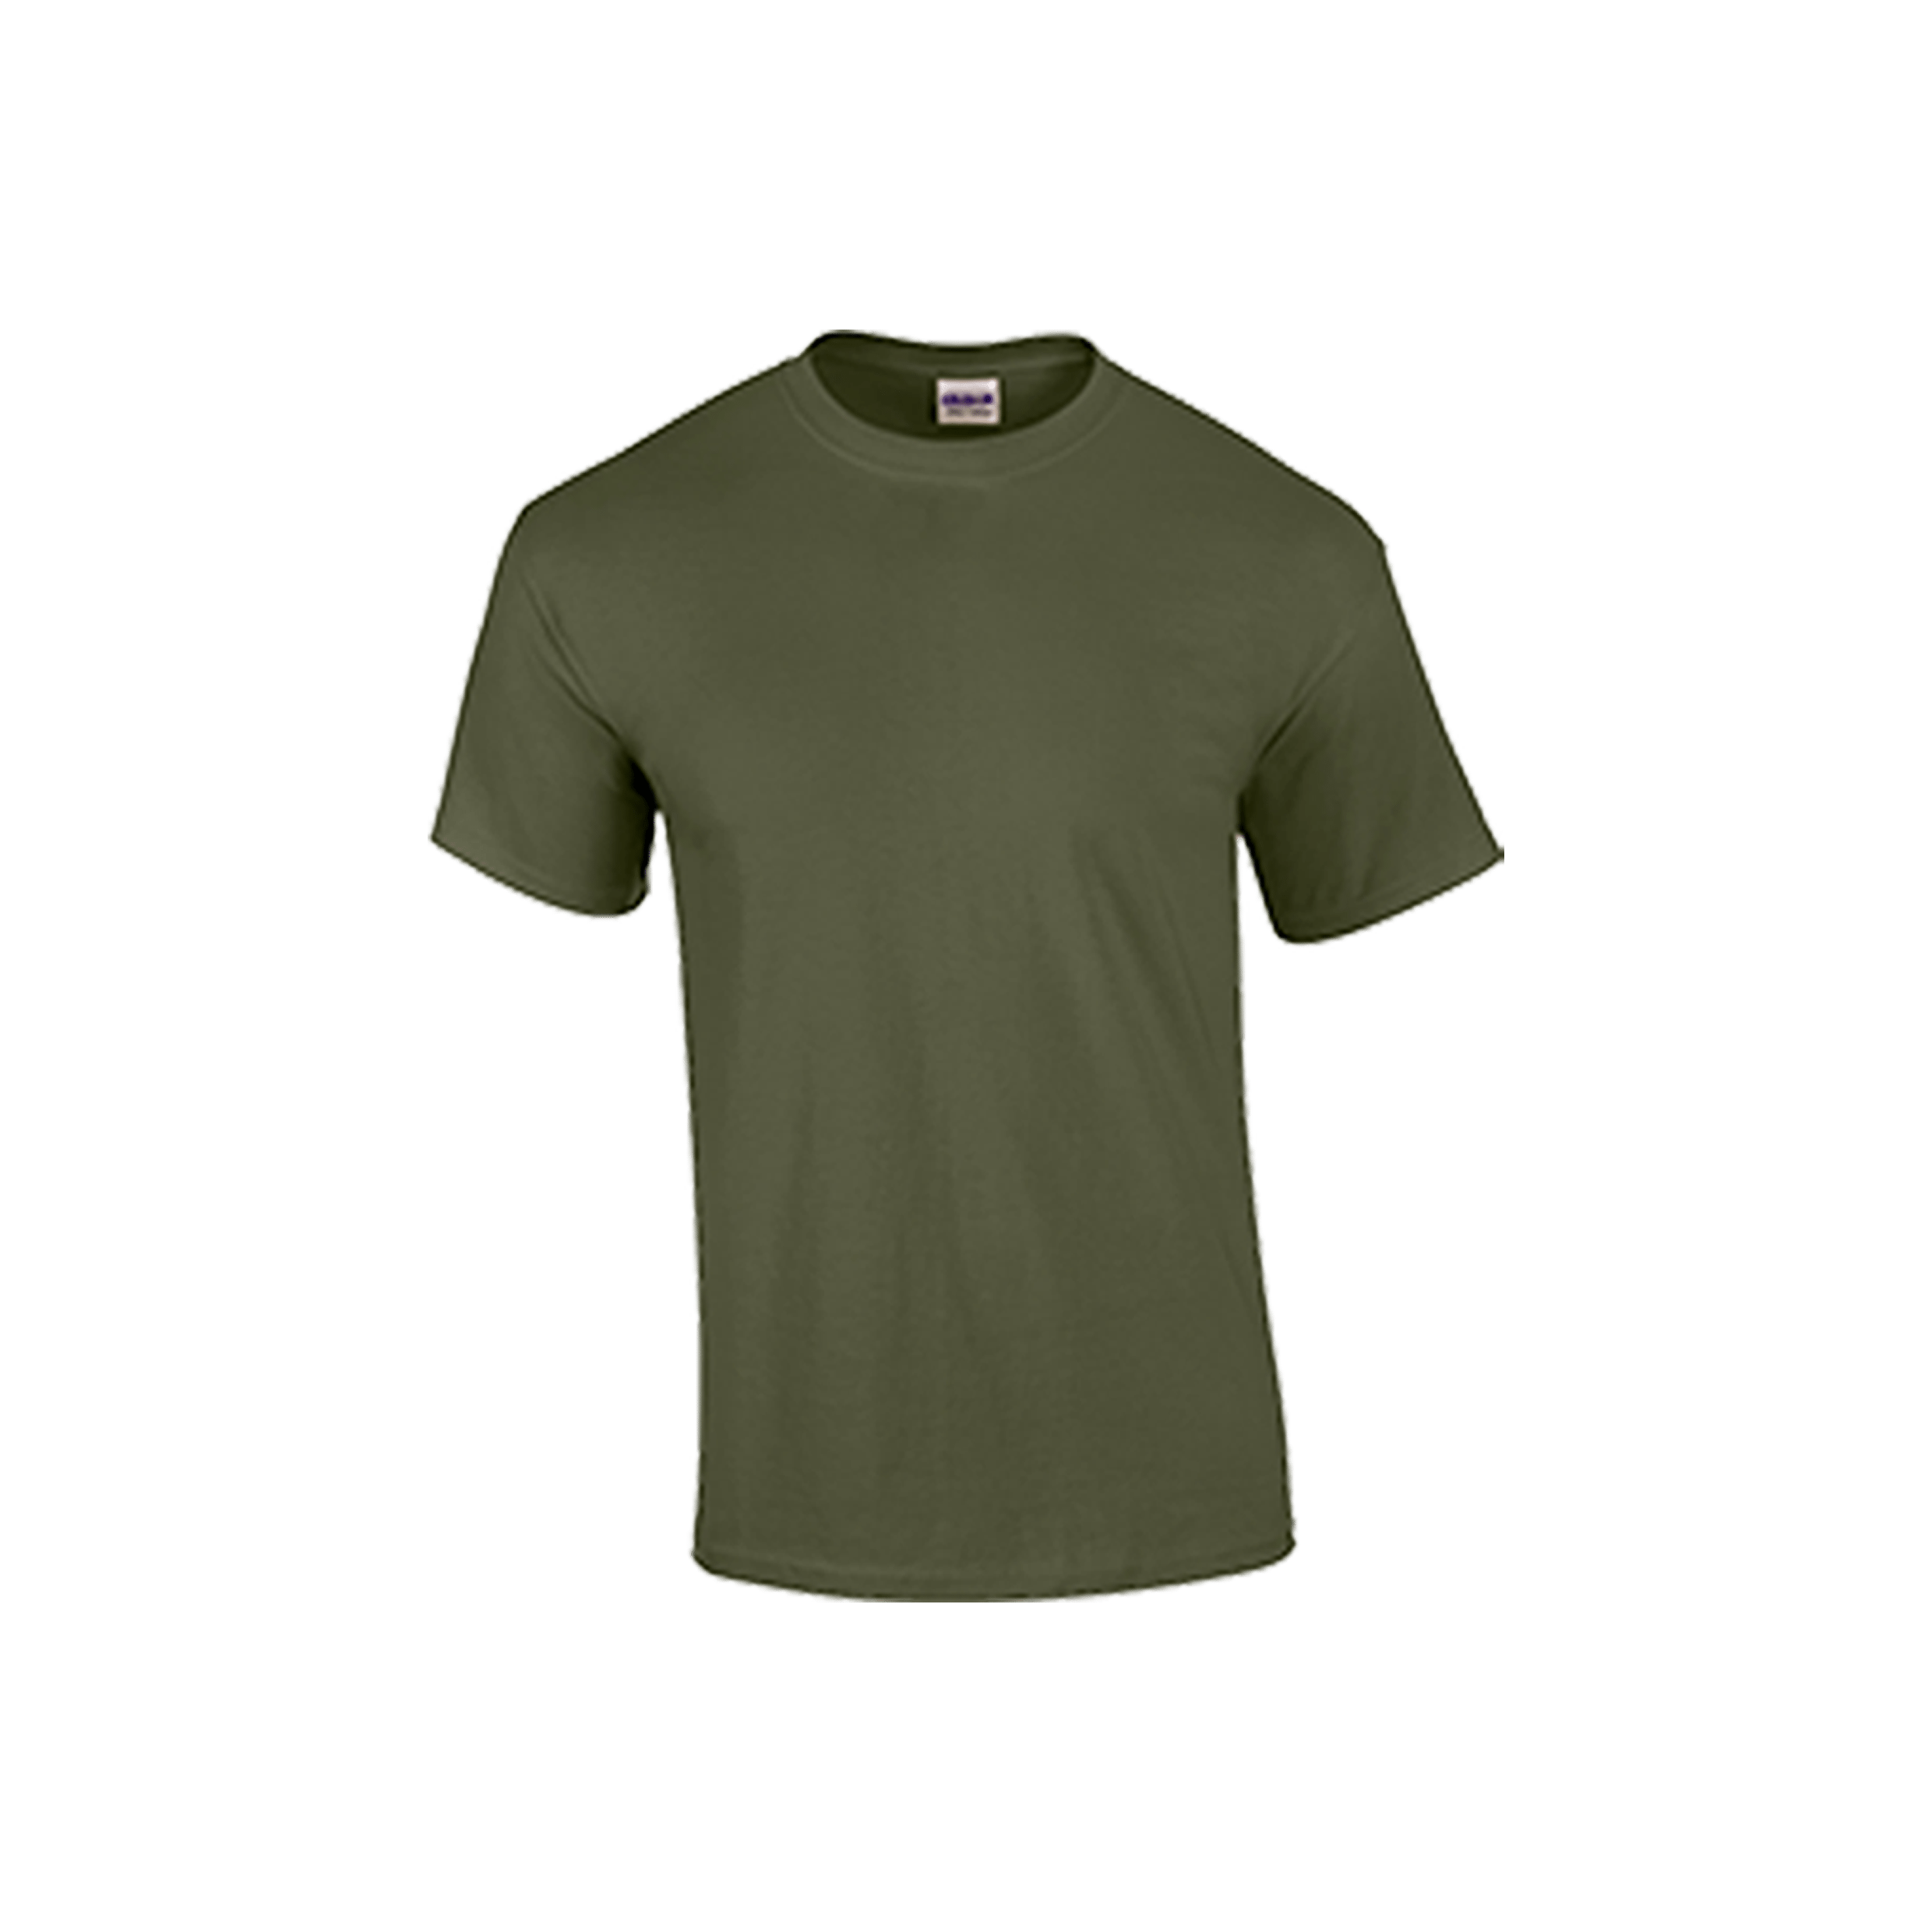 NVM Flexible Performance T-Shirt, One size fits all